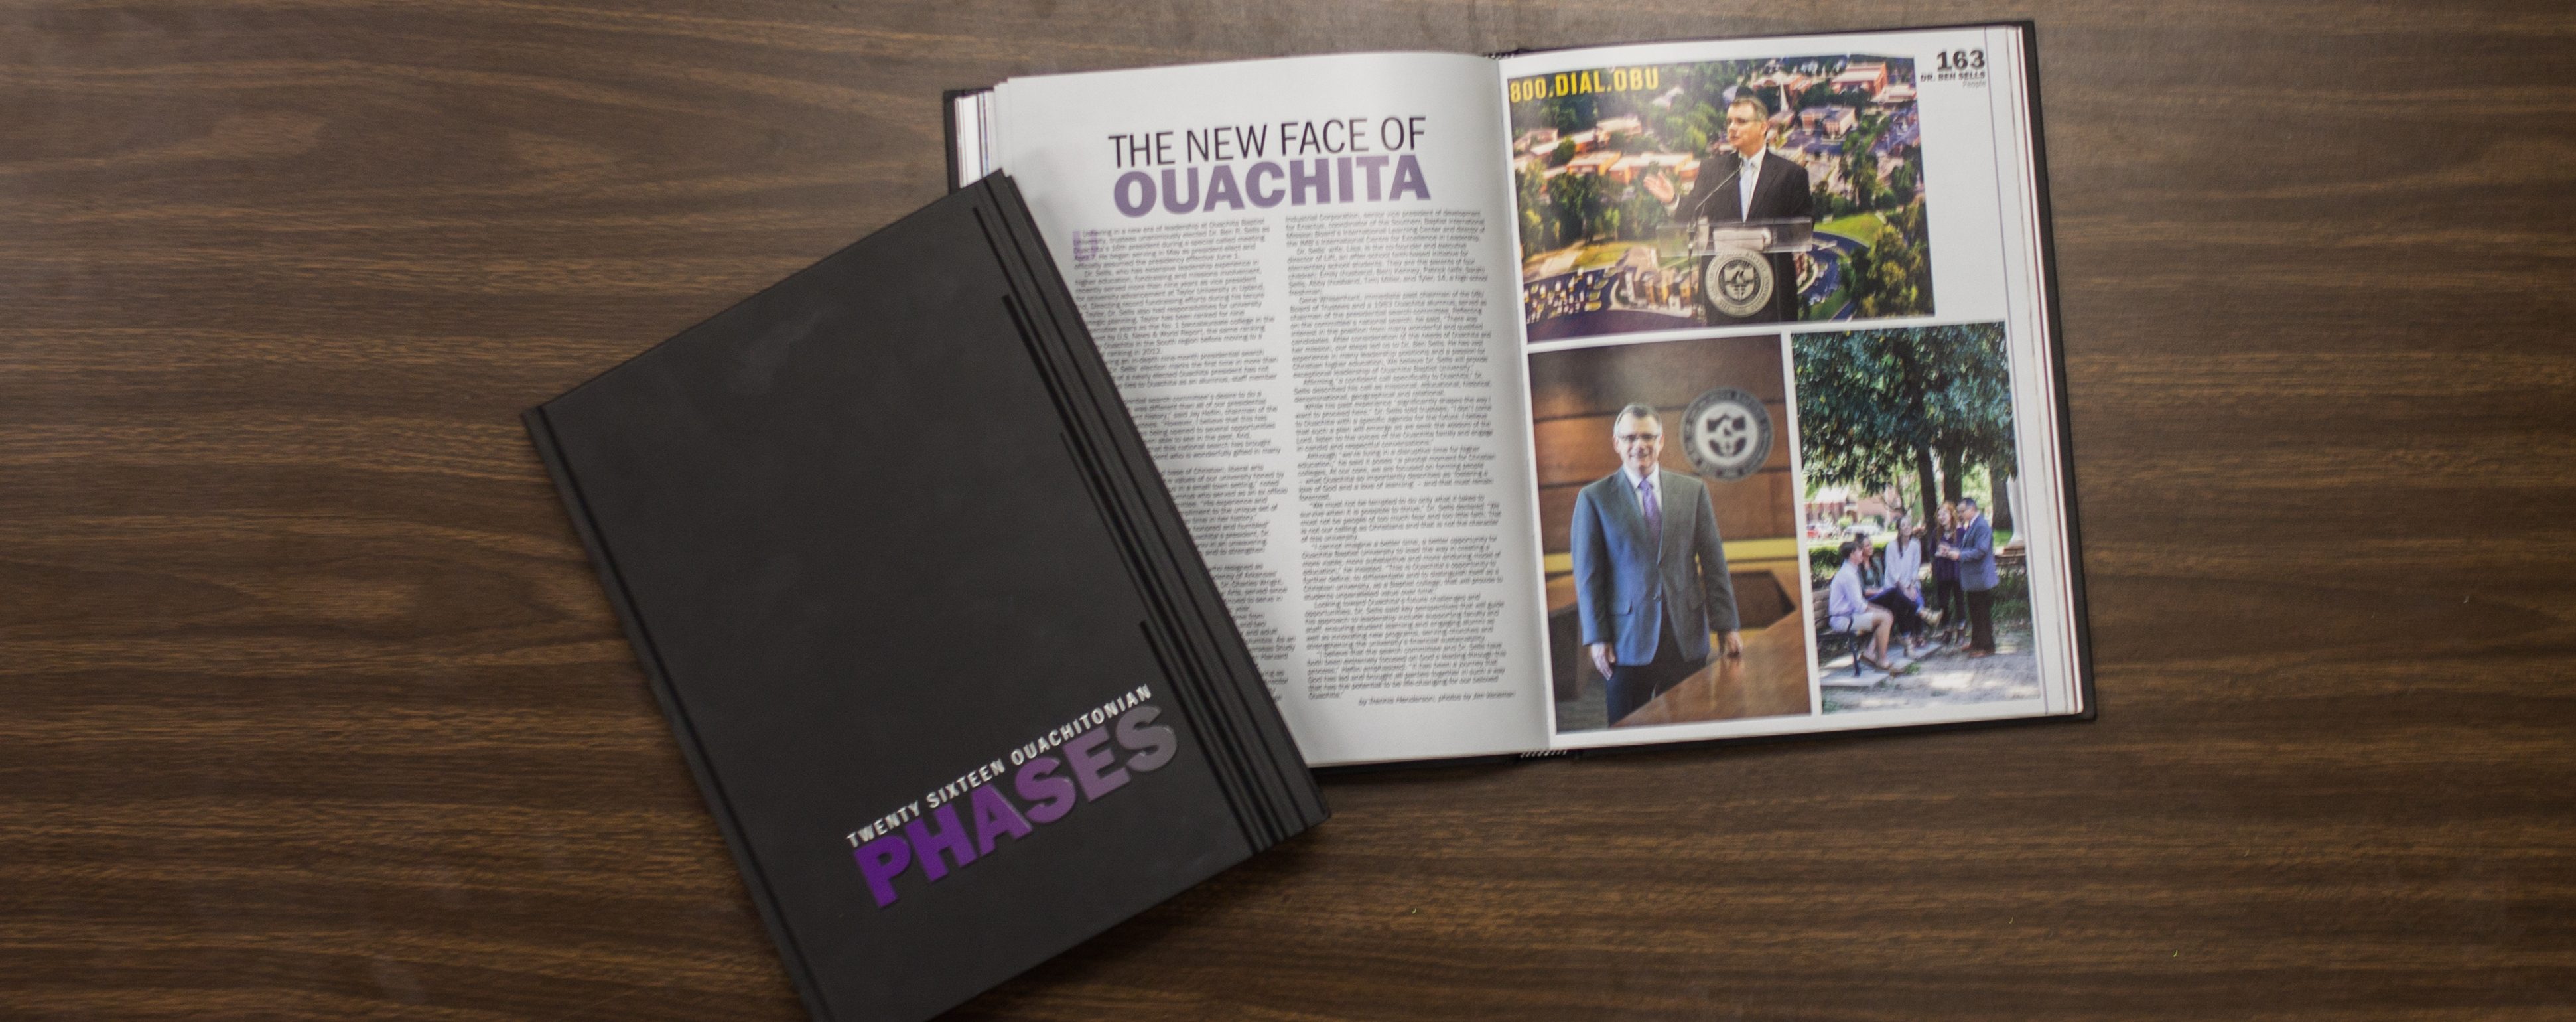 2016 Ouachitonian yearbook earns top national awards from ACP and CSPA.